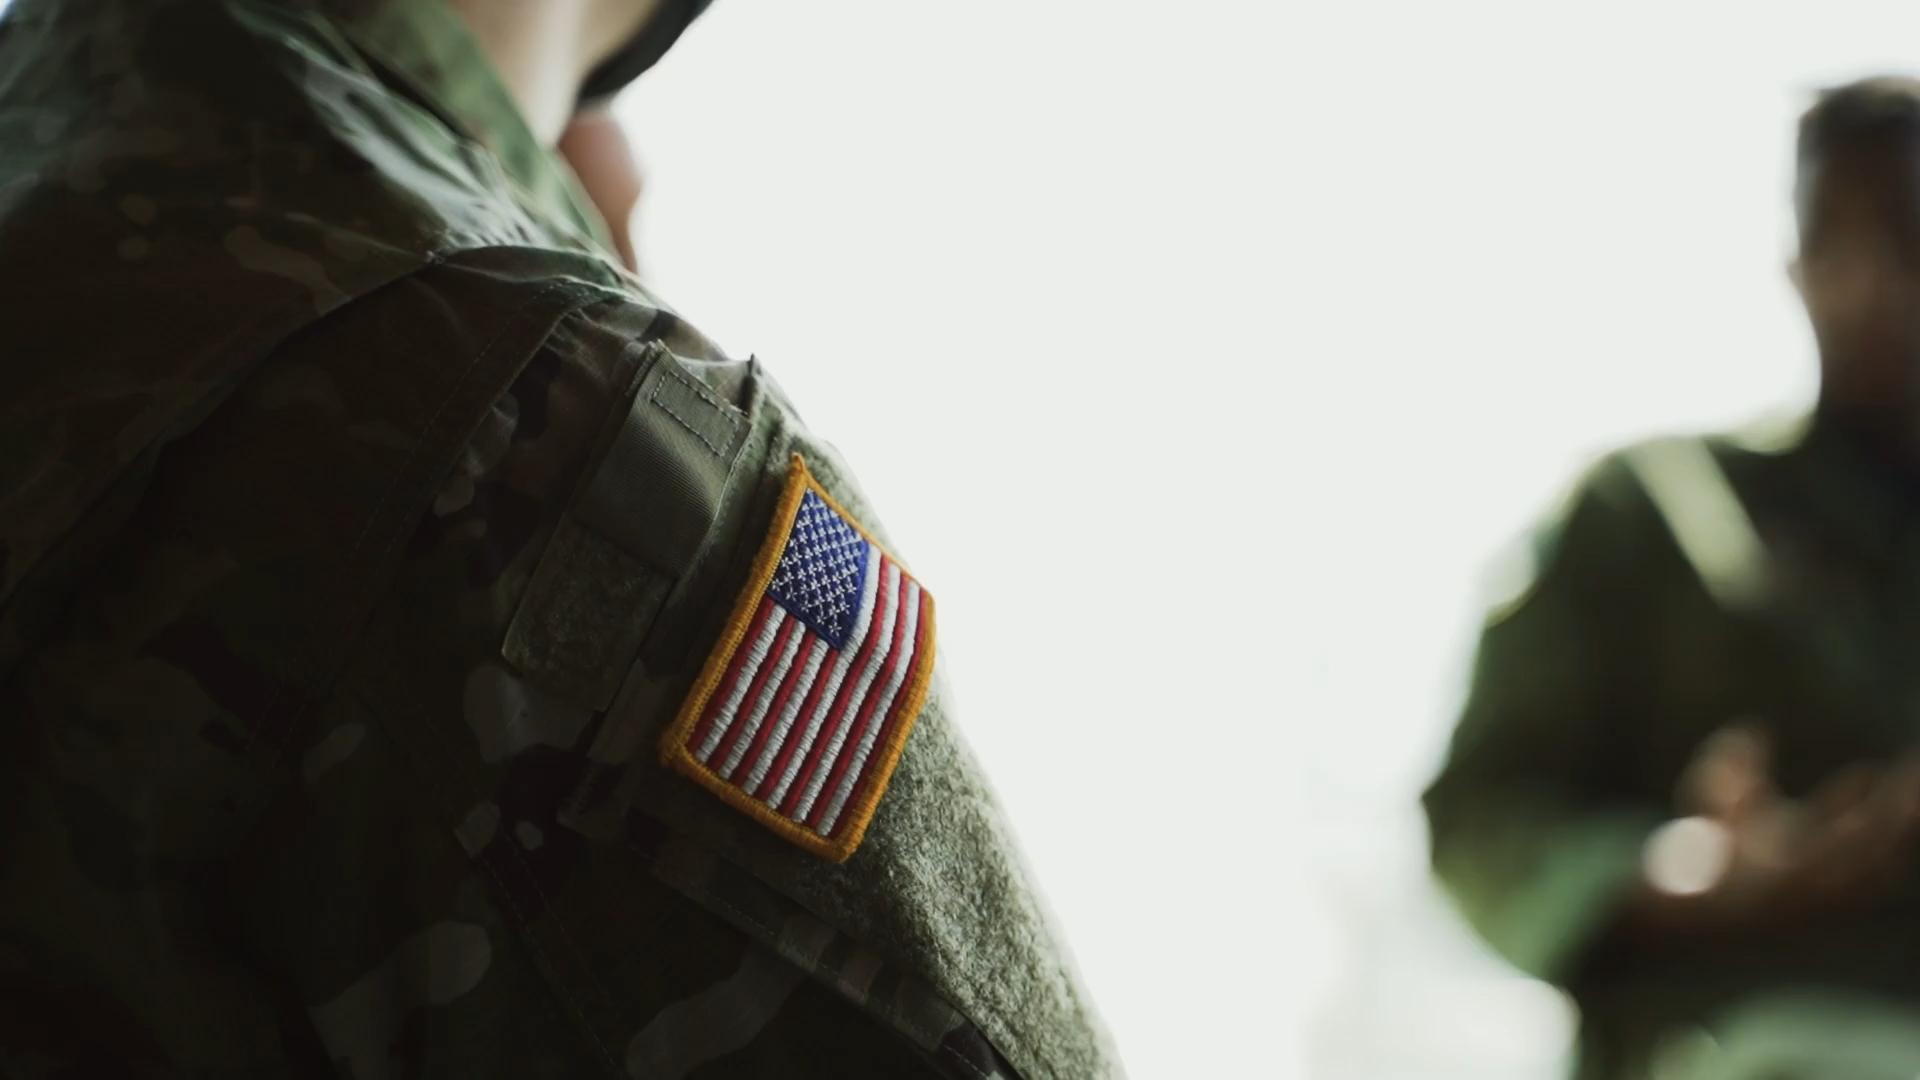 Soldier seen from behind with an American flag patch on the shoulder.